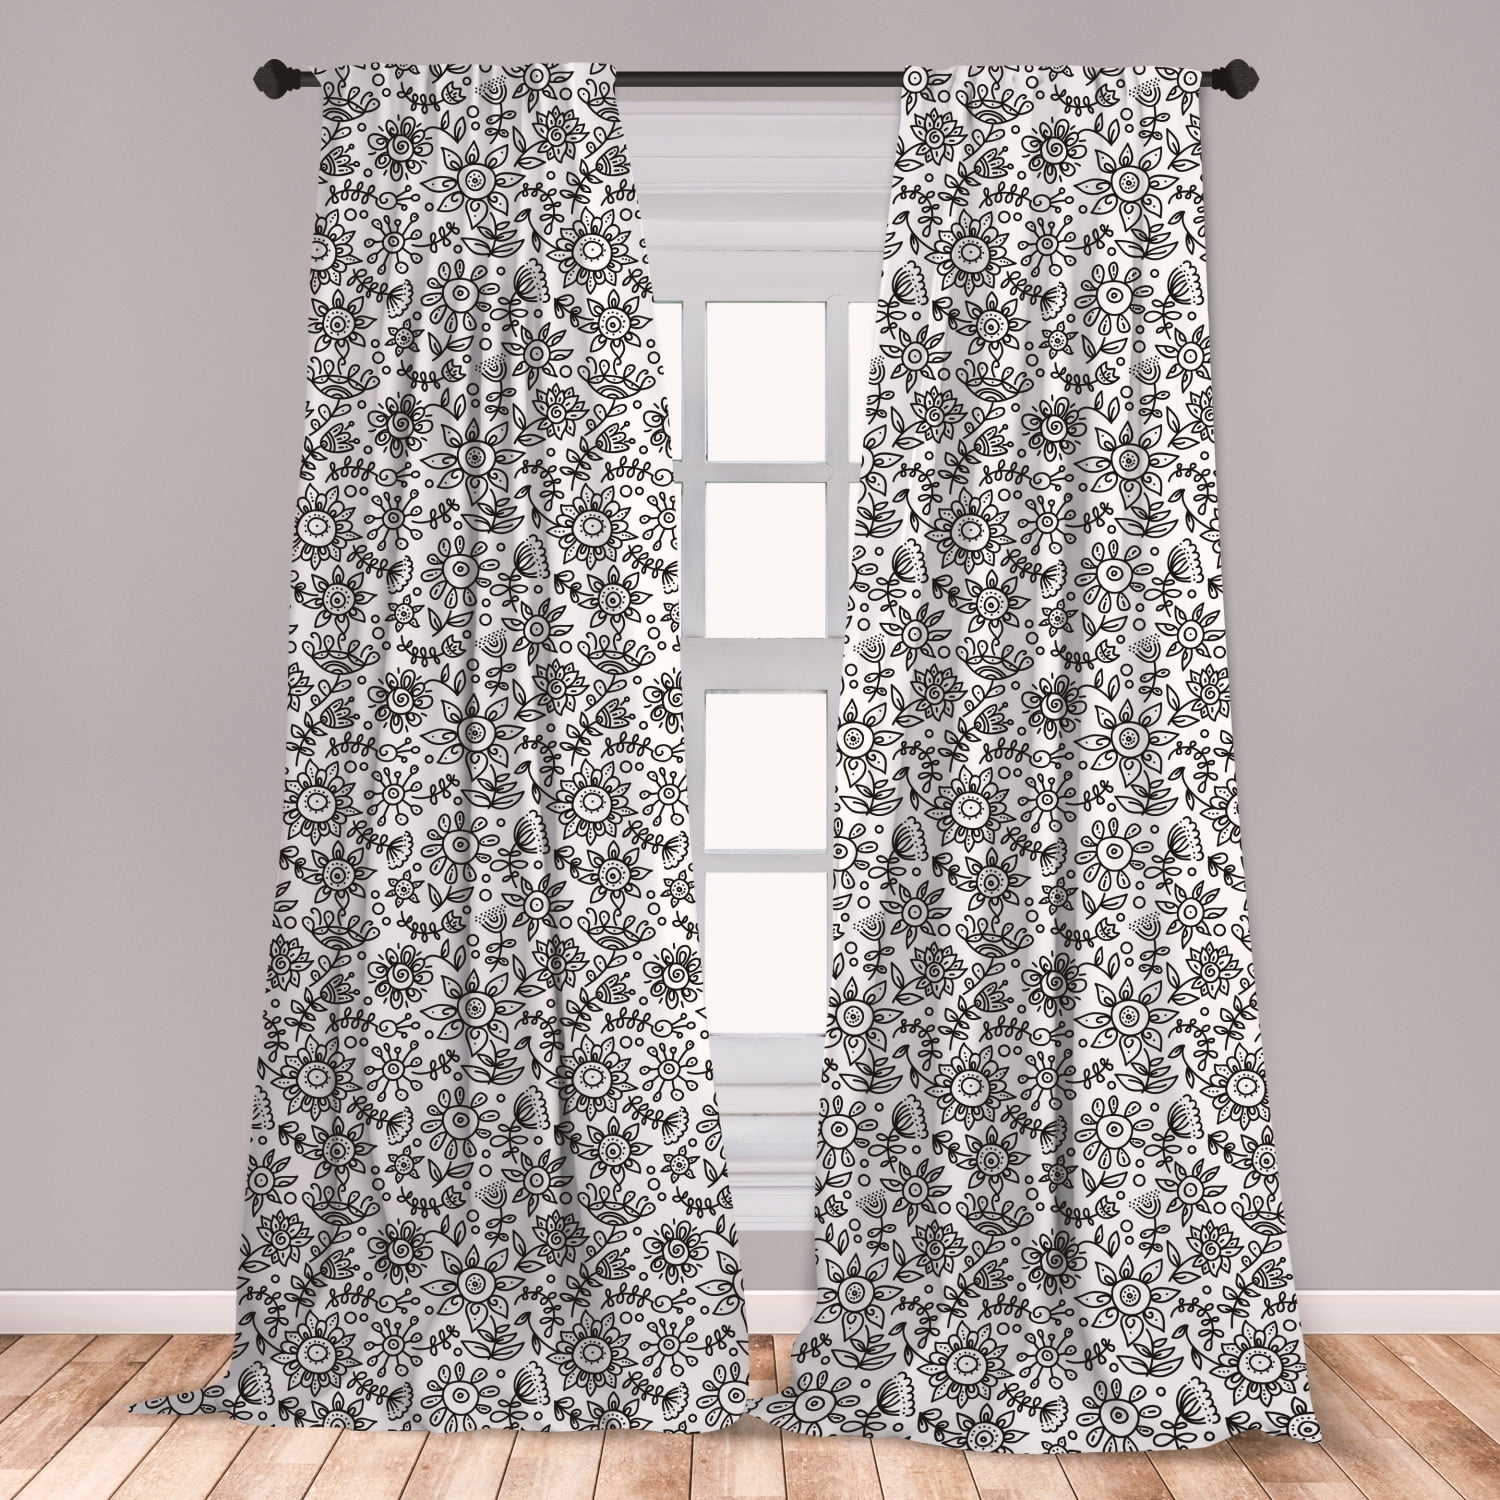 Black and White Curtains 2 Panels Set, Floral Composition Doodle Style